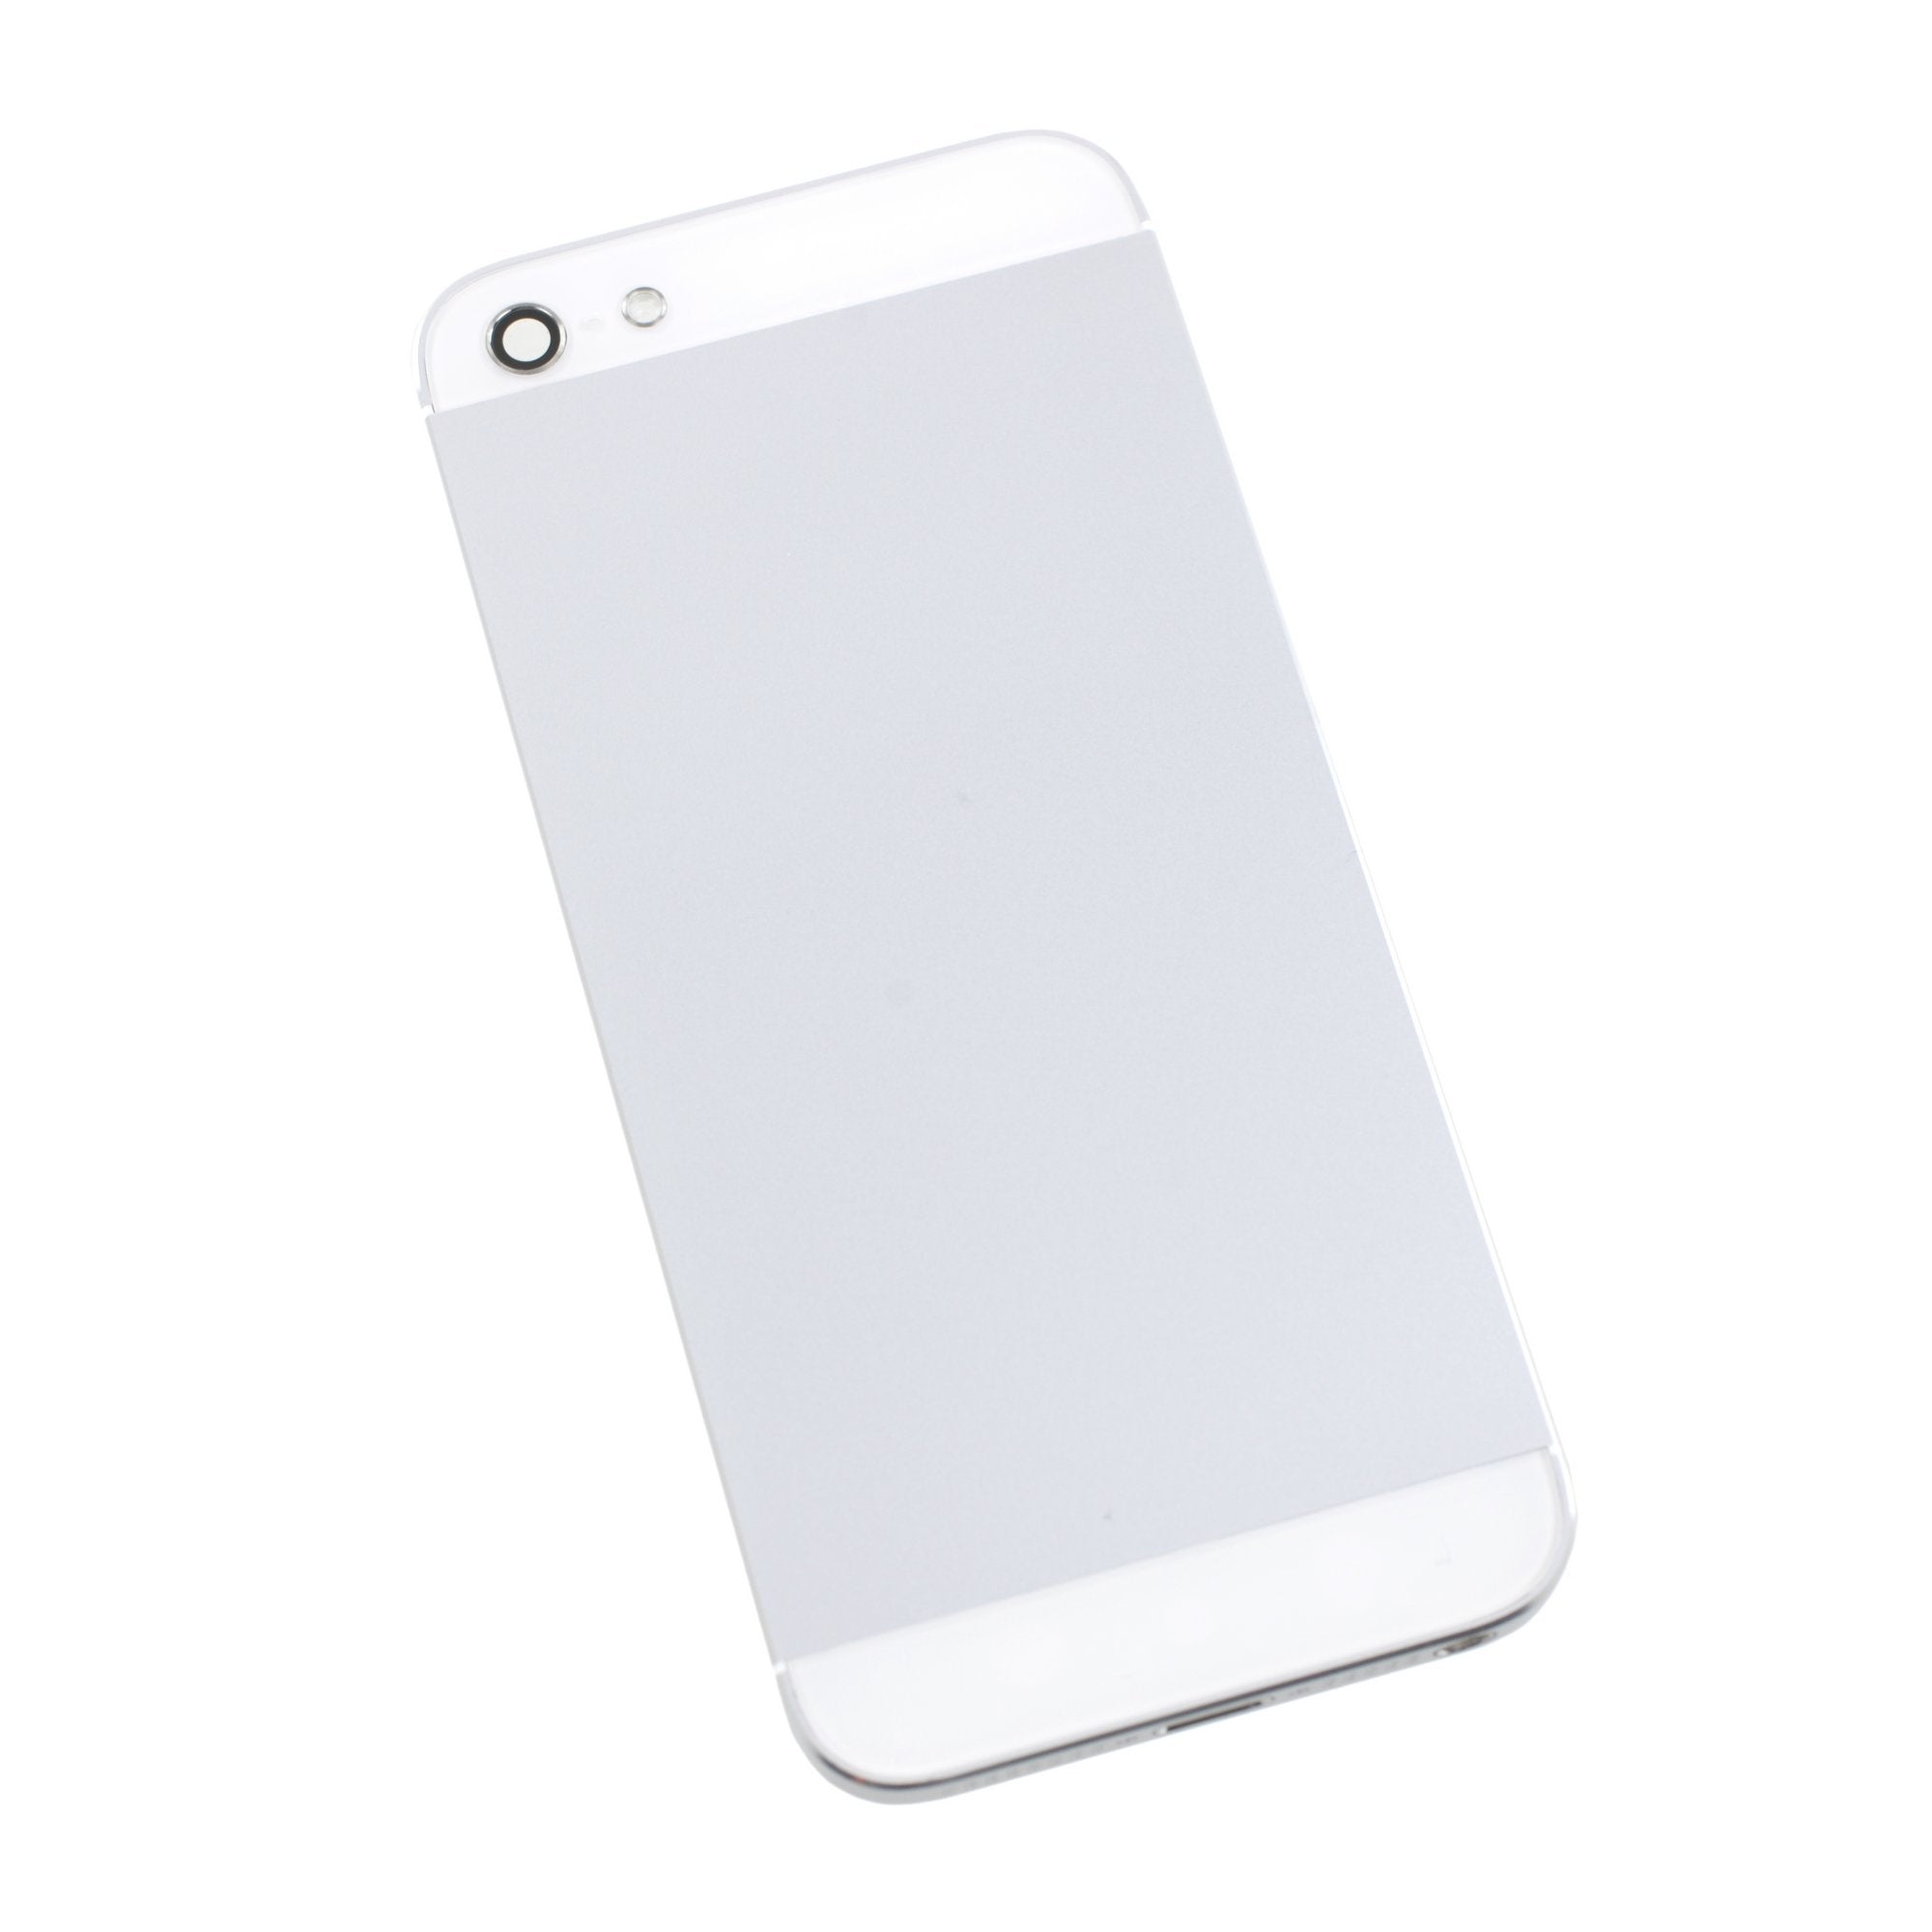 iPhone 5 Blank Rear Case White New